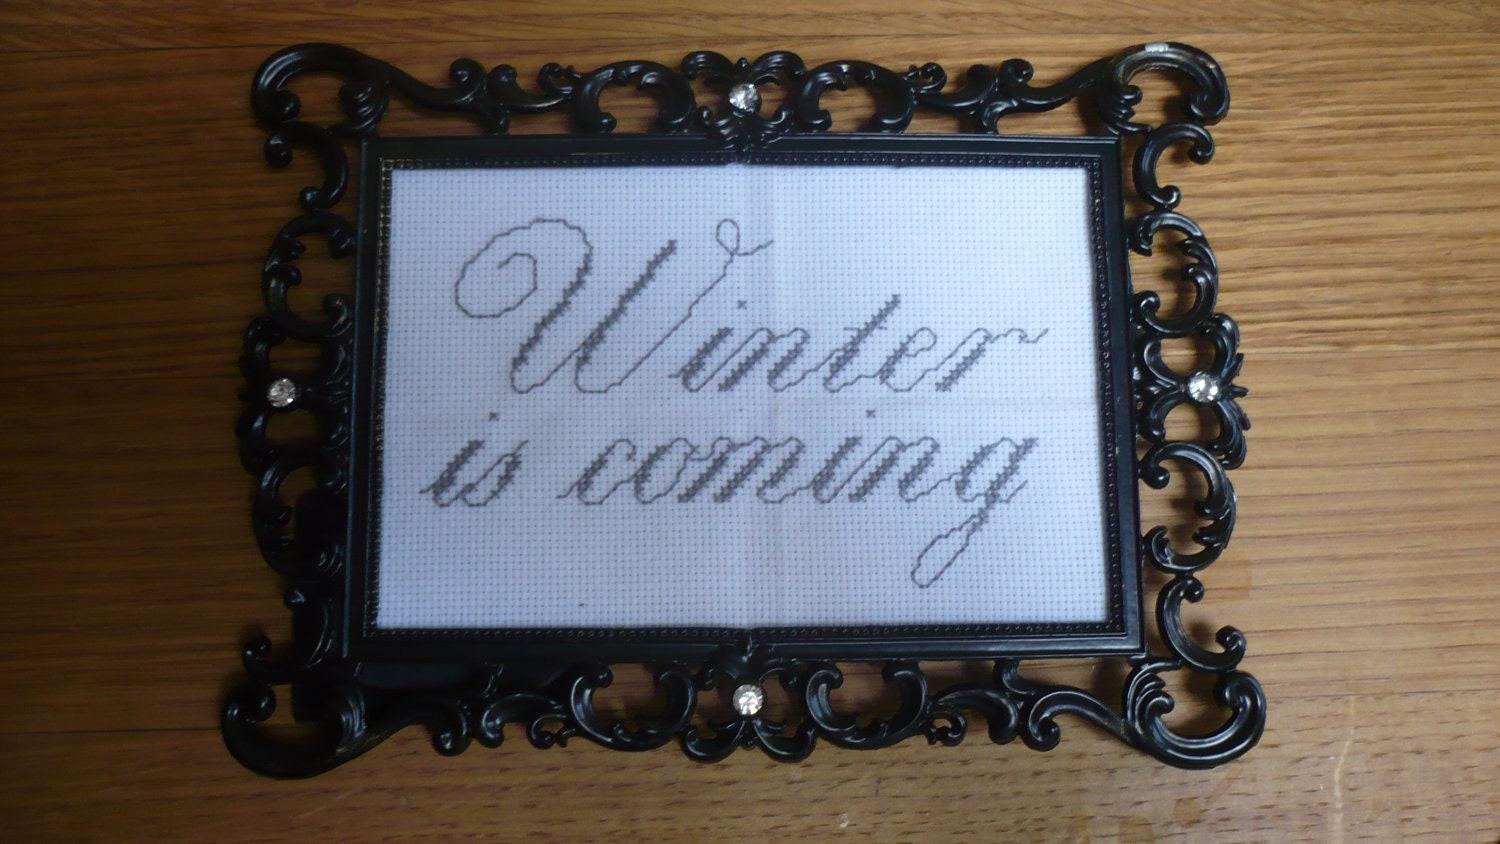 Stark "Winter is coming" Game of Thrones cross stitch sampler